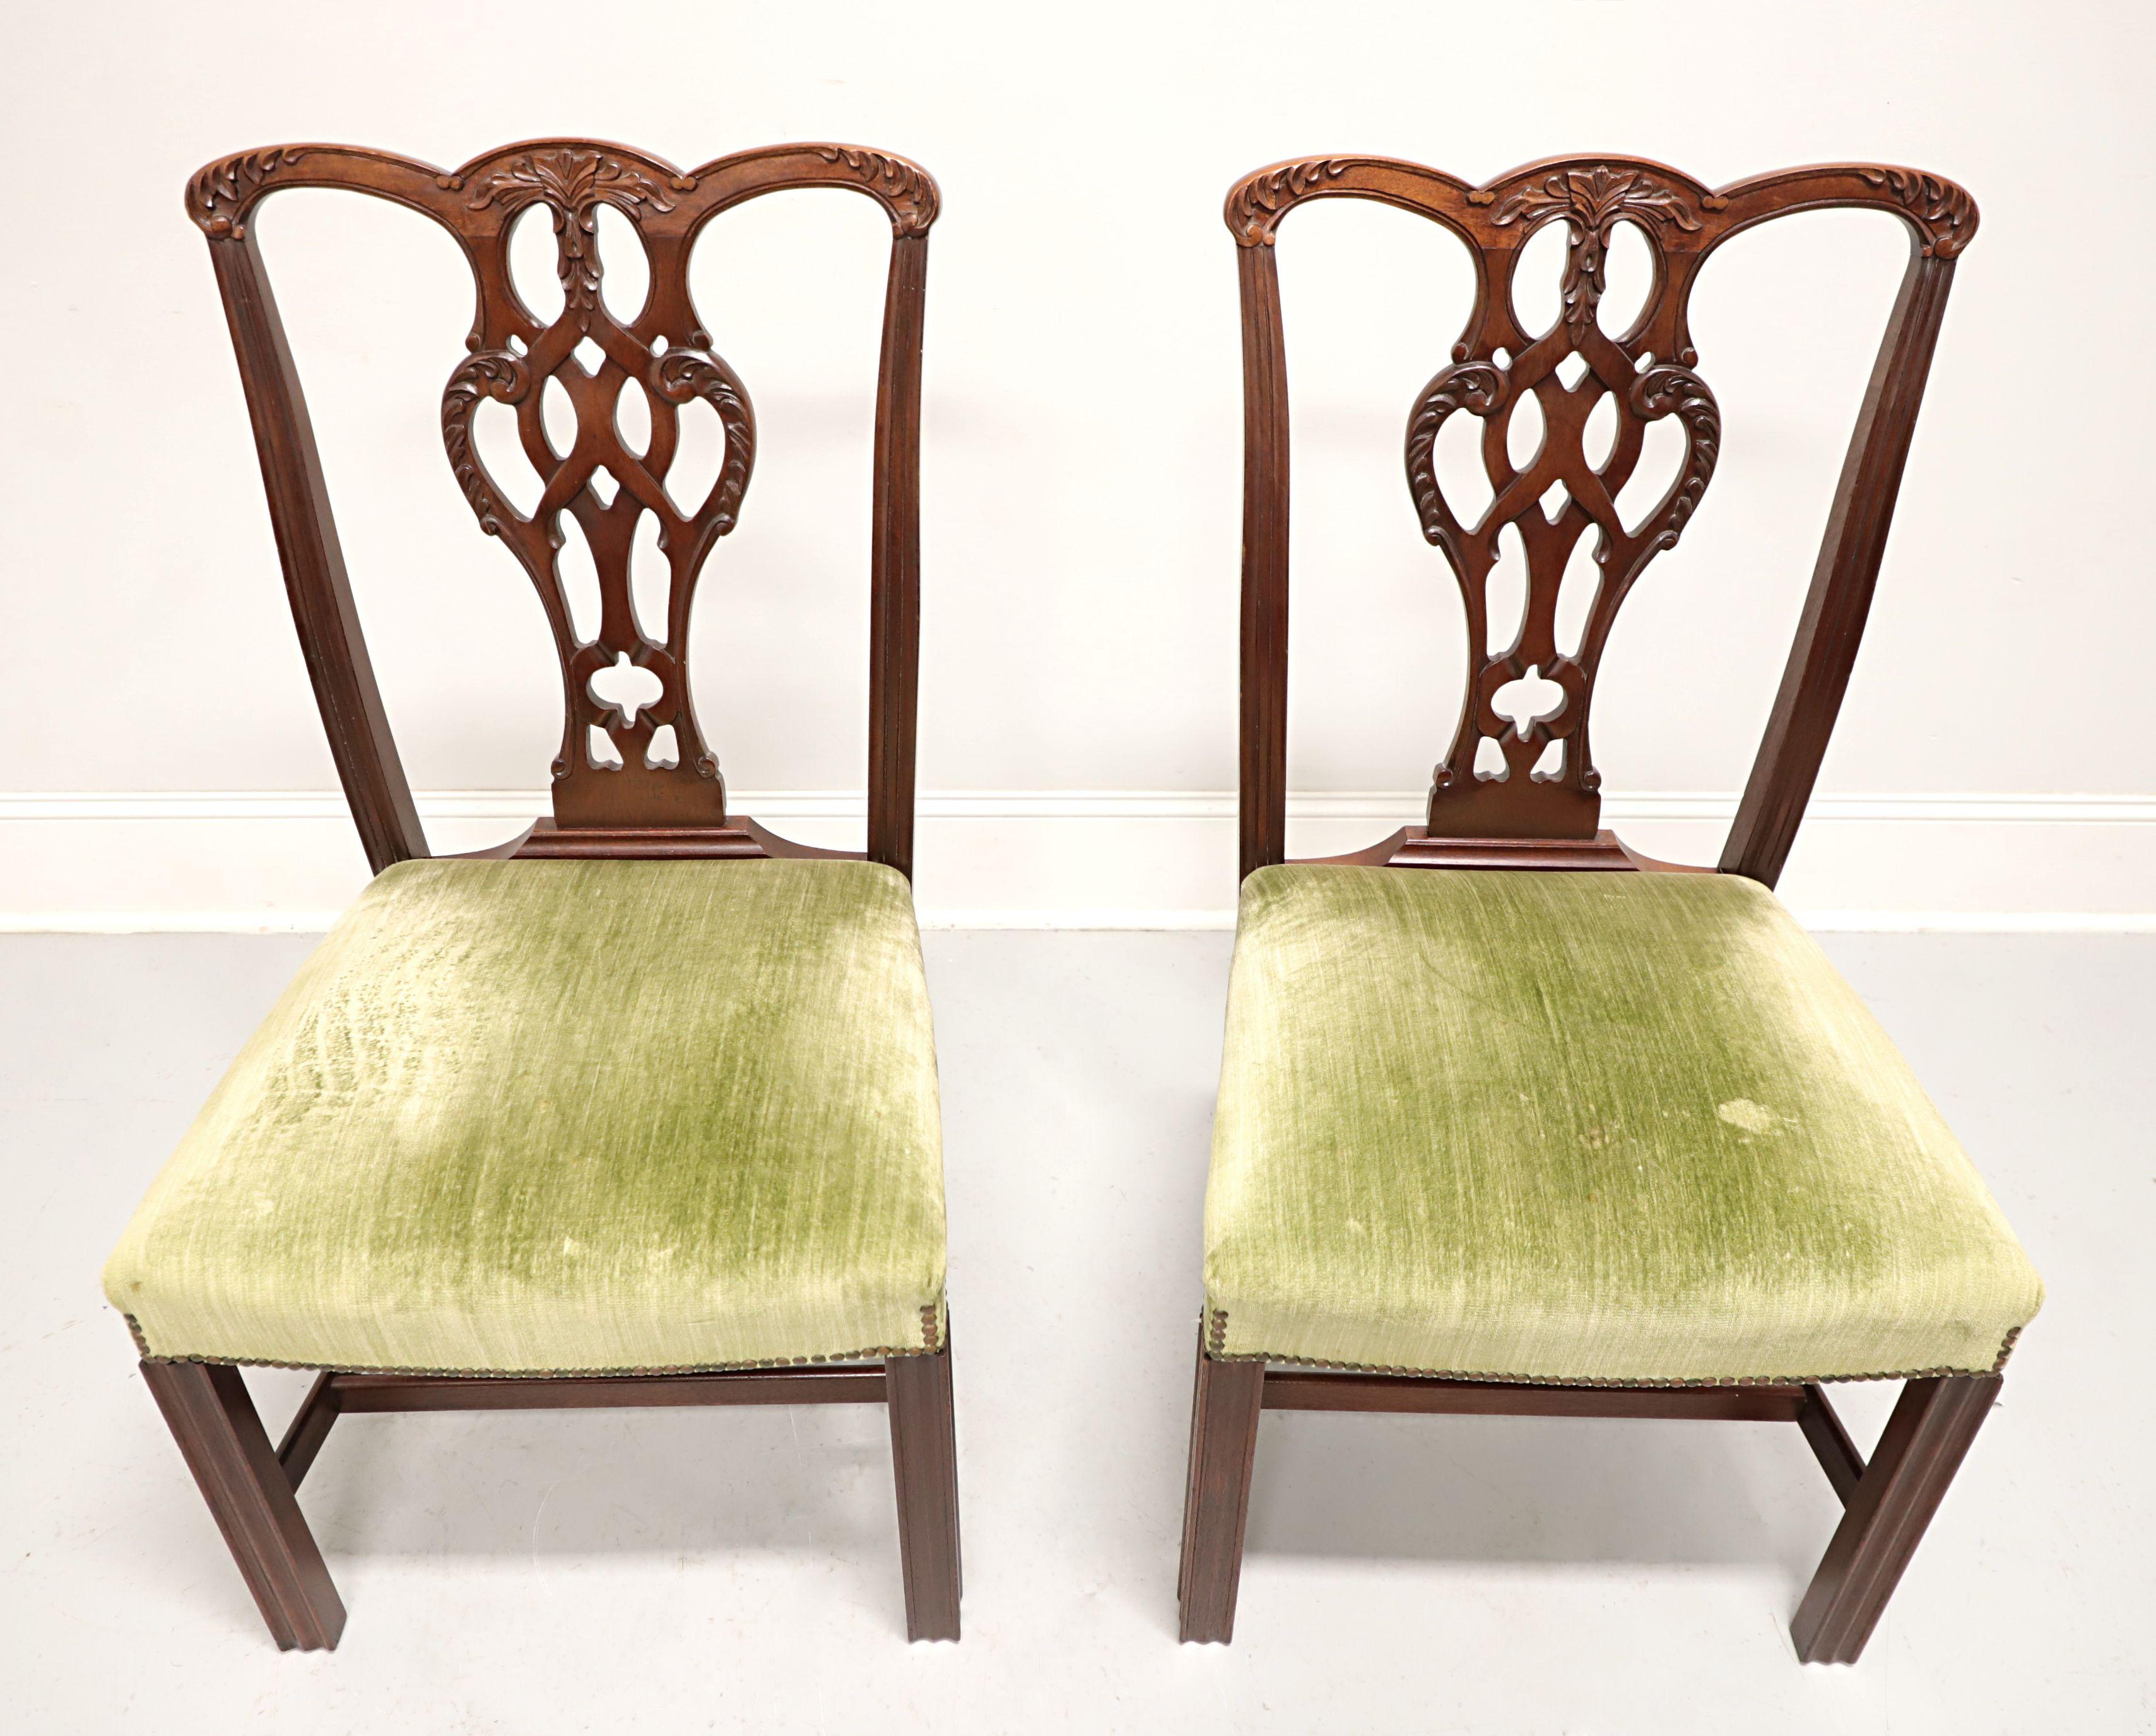 A pair of Chippendale style dining side chairs by high-quality furniture maker Craftique. Solid mahogany with their English Mahogany finish, decoratively carved crest rail, back rest, fluted stiles, and straight fluted front legs with stretchers.